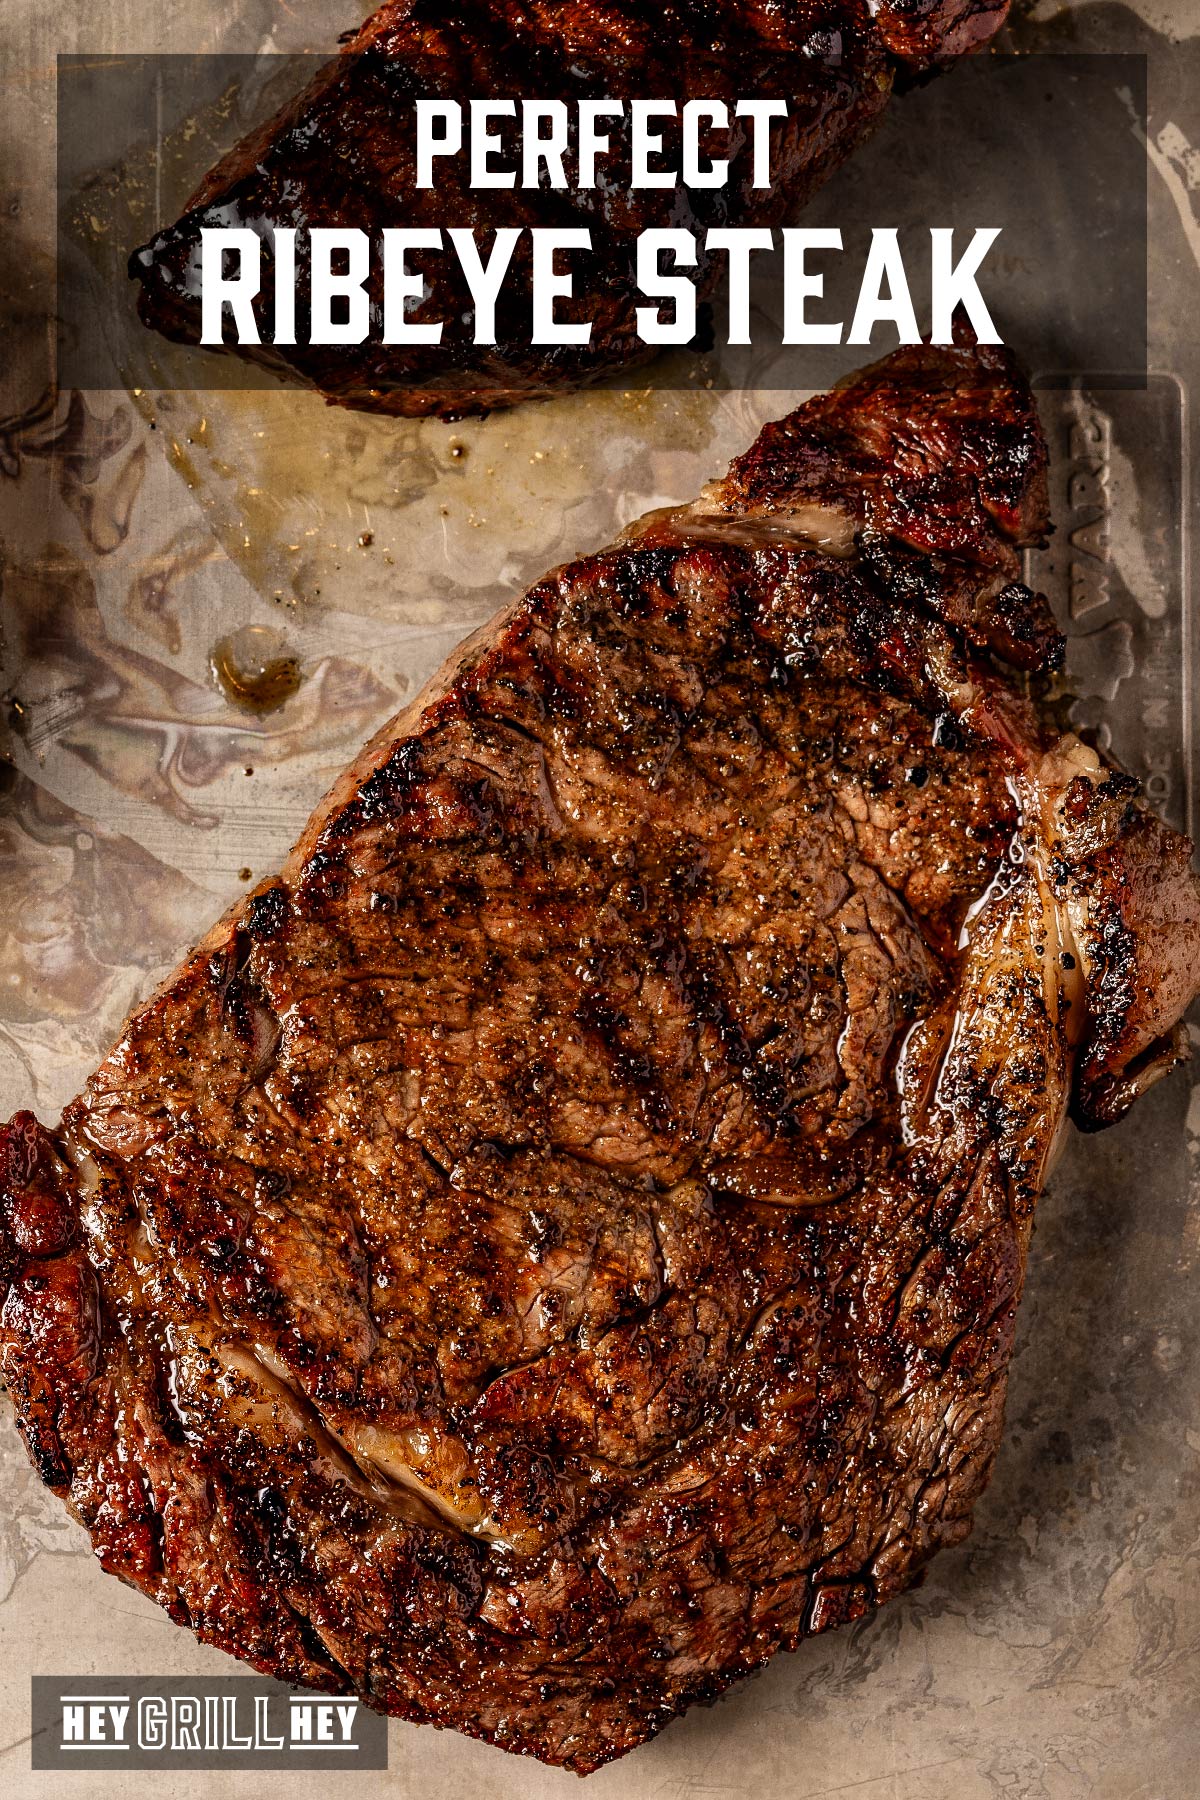 A grilled ribeye on a metal pan.  The text is read "Perfect ribeye steak".